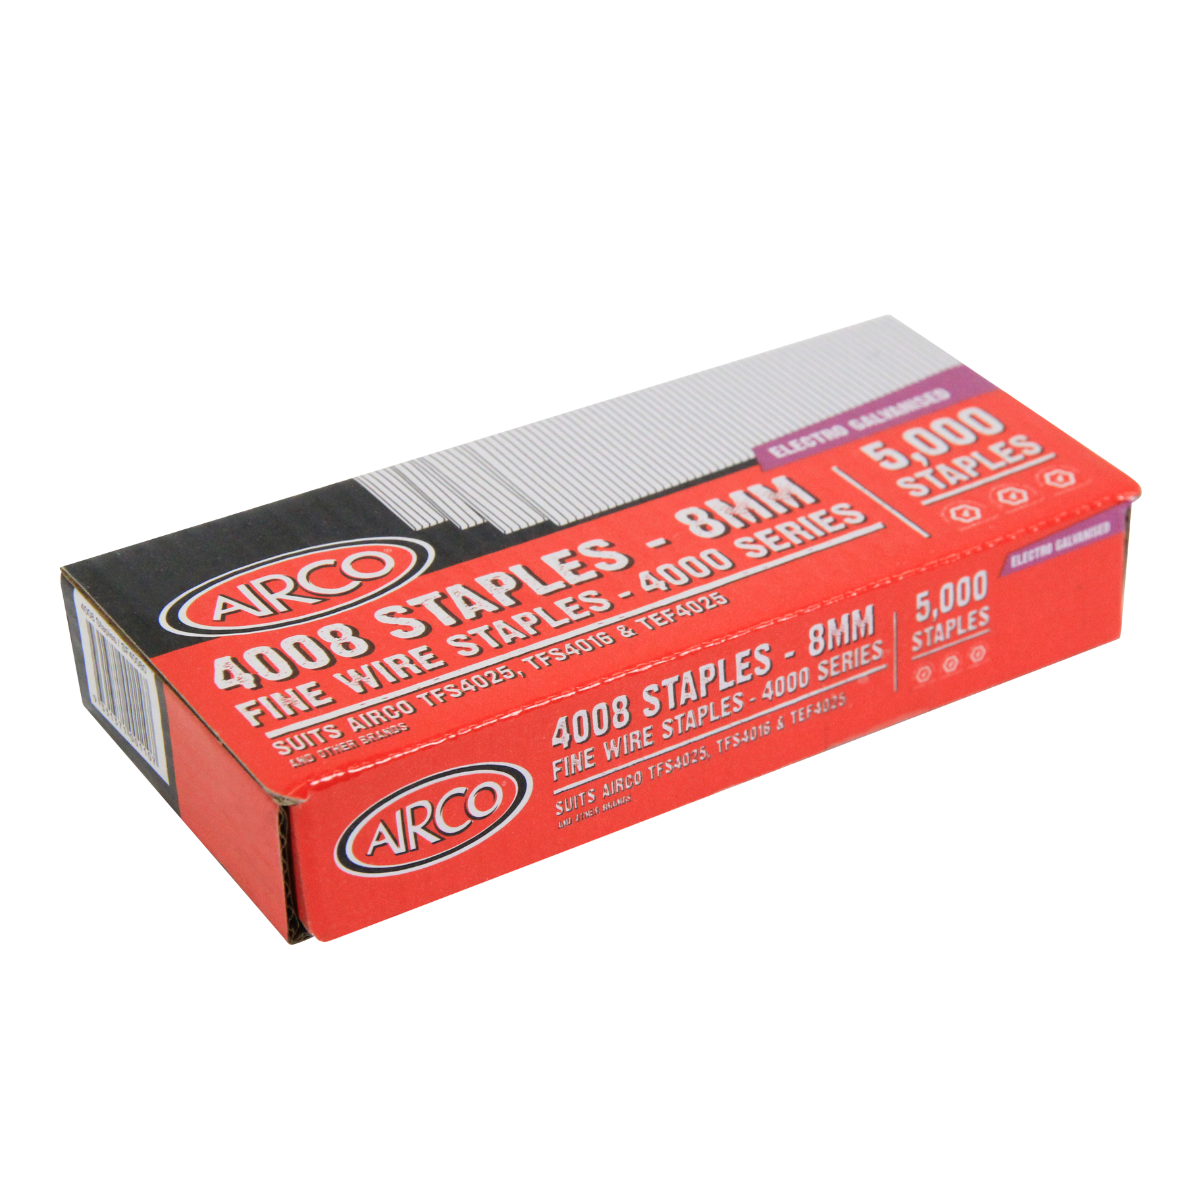 4000 Series Staples by Airco